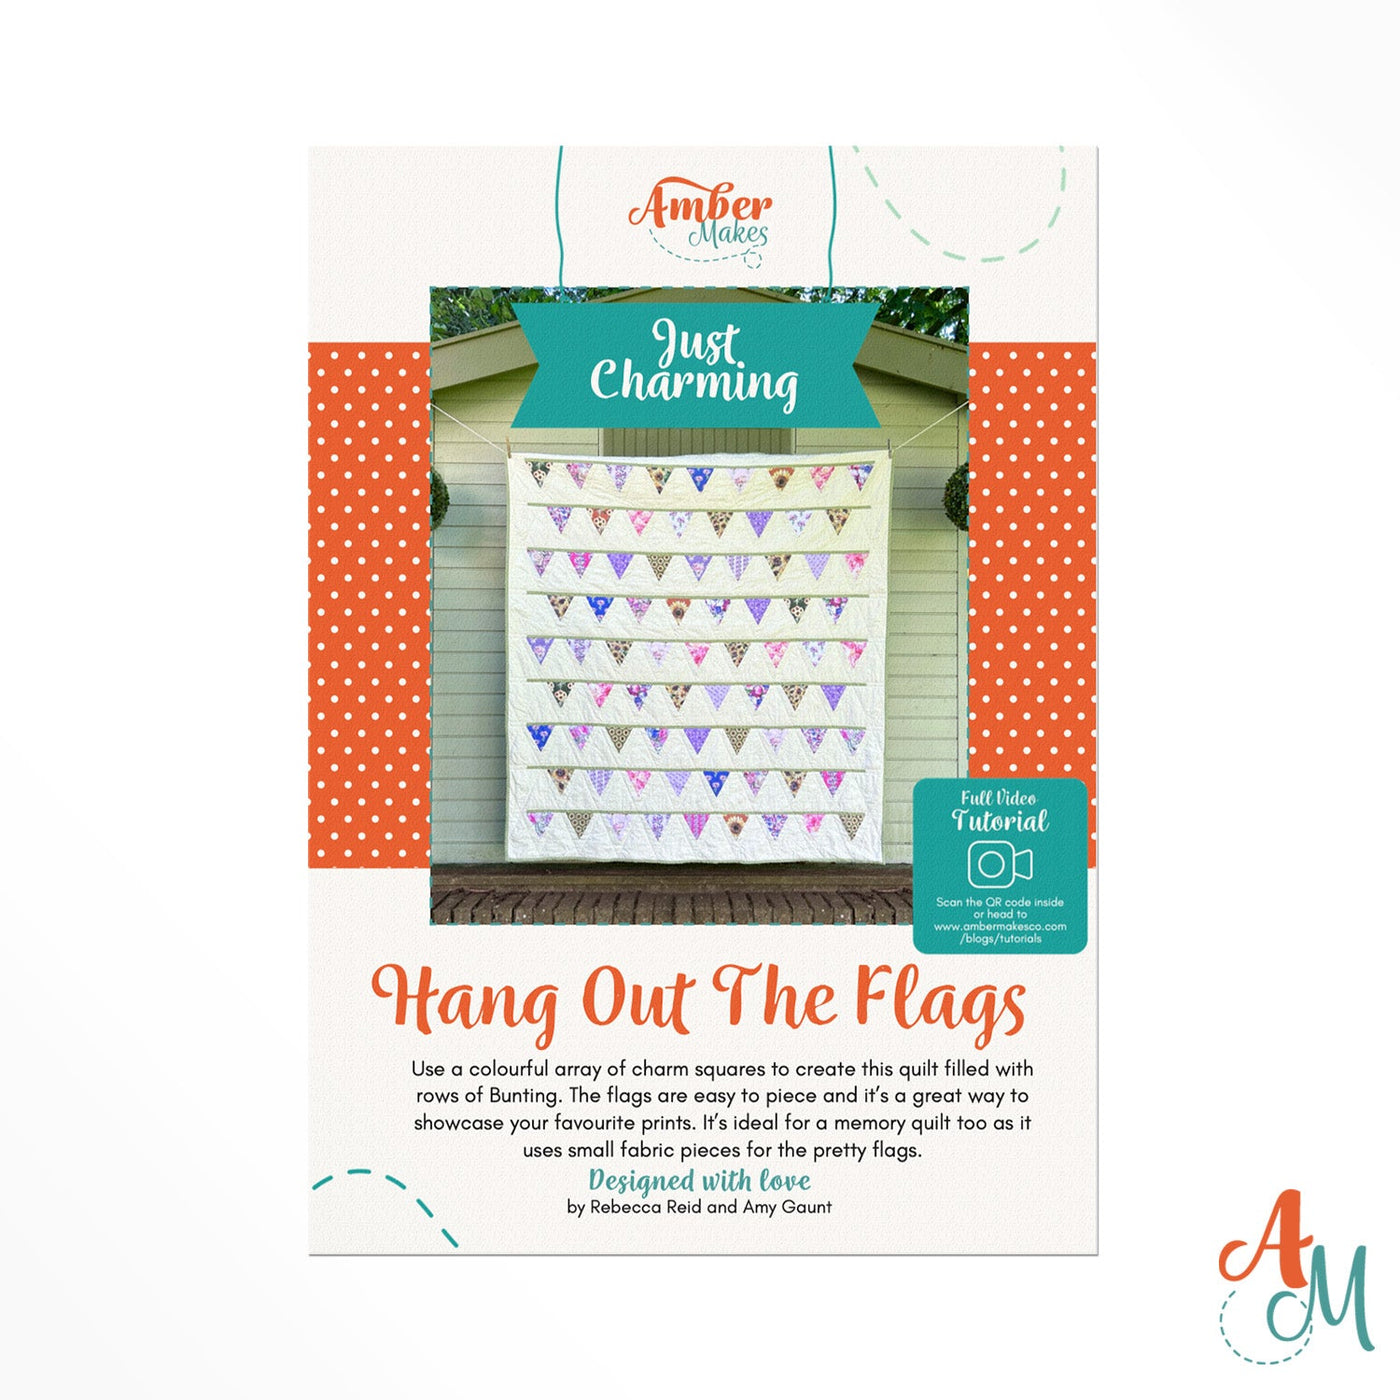 Just Charming - Hang Out The Flags Quilt pattern Printed Instructions Booklet